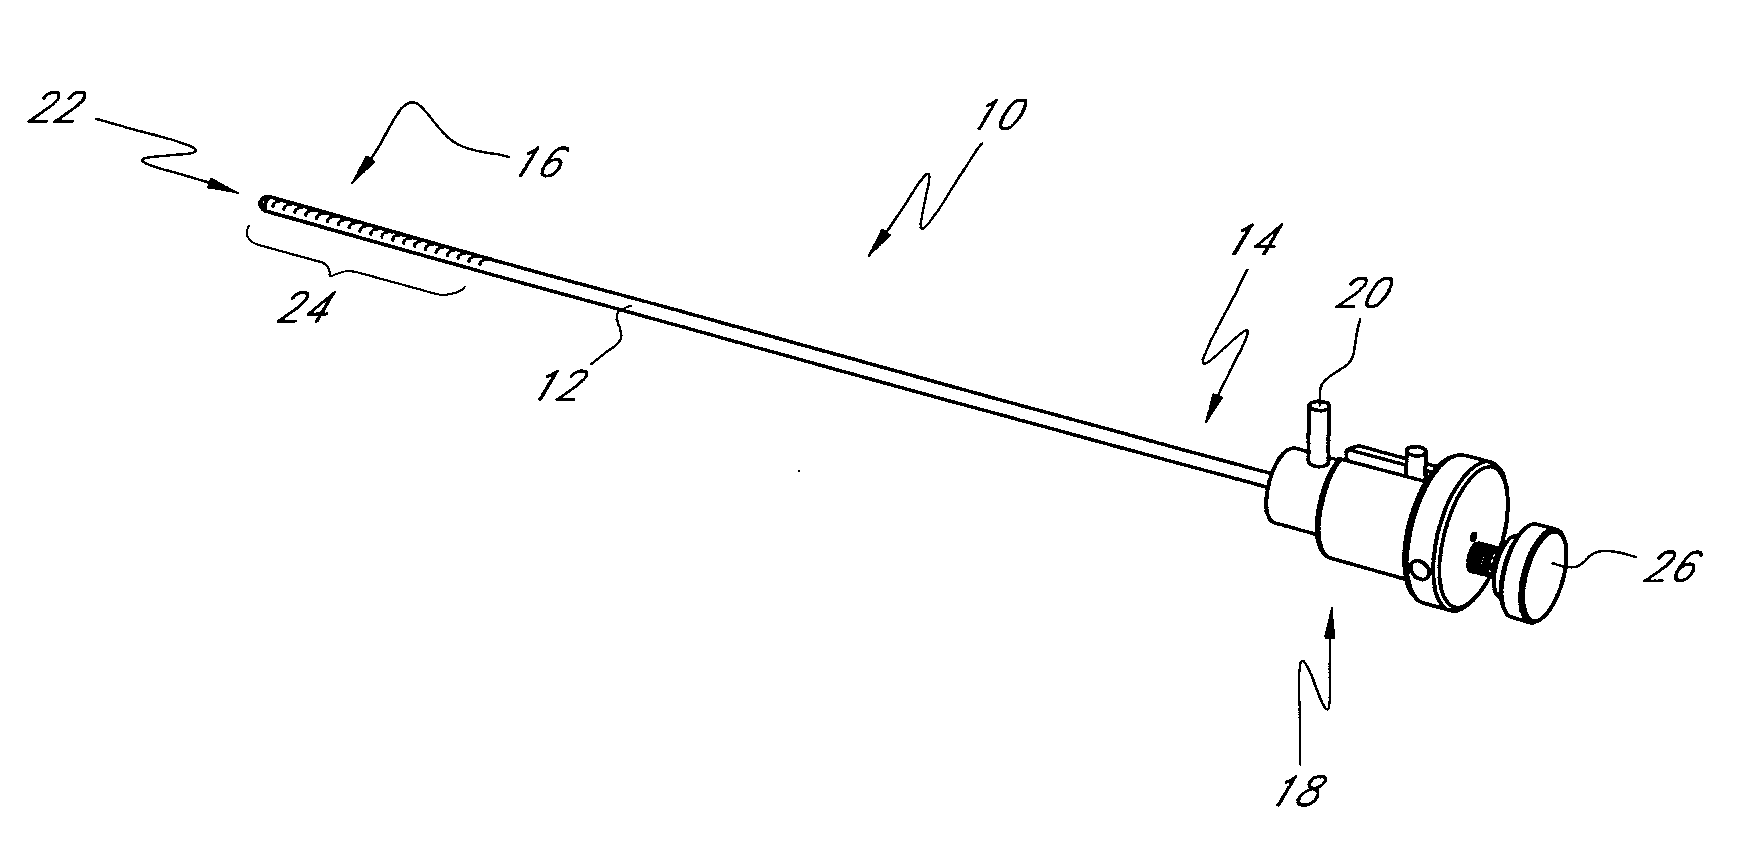 Steerable vertebroplasty system with a plurality of cavity creation elements